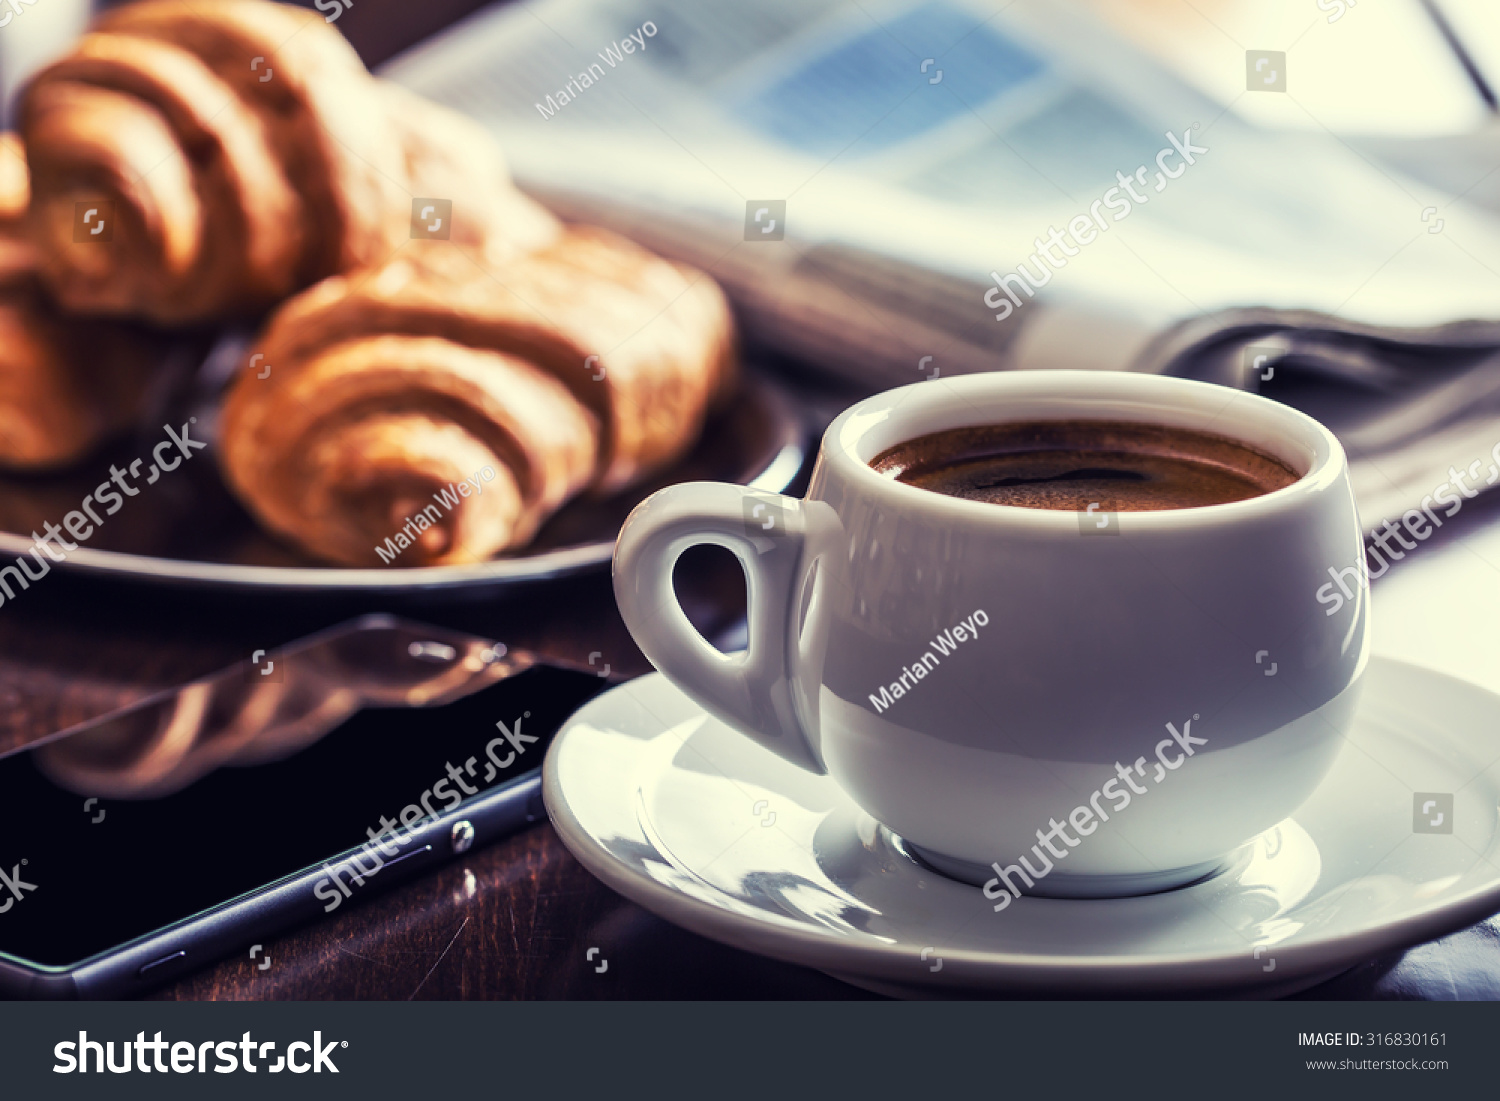 Business break with  Cup of coffee croissants and mobile phone. #316830161